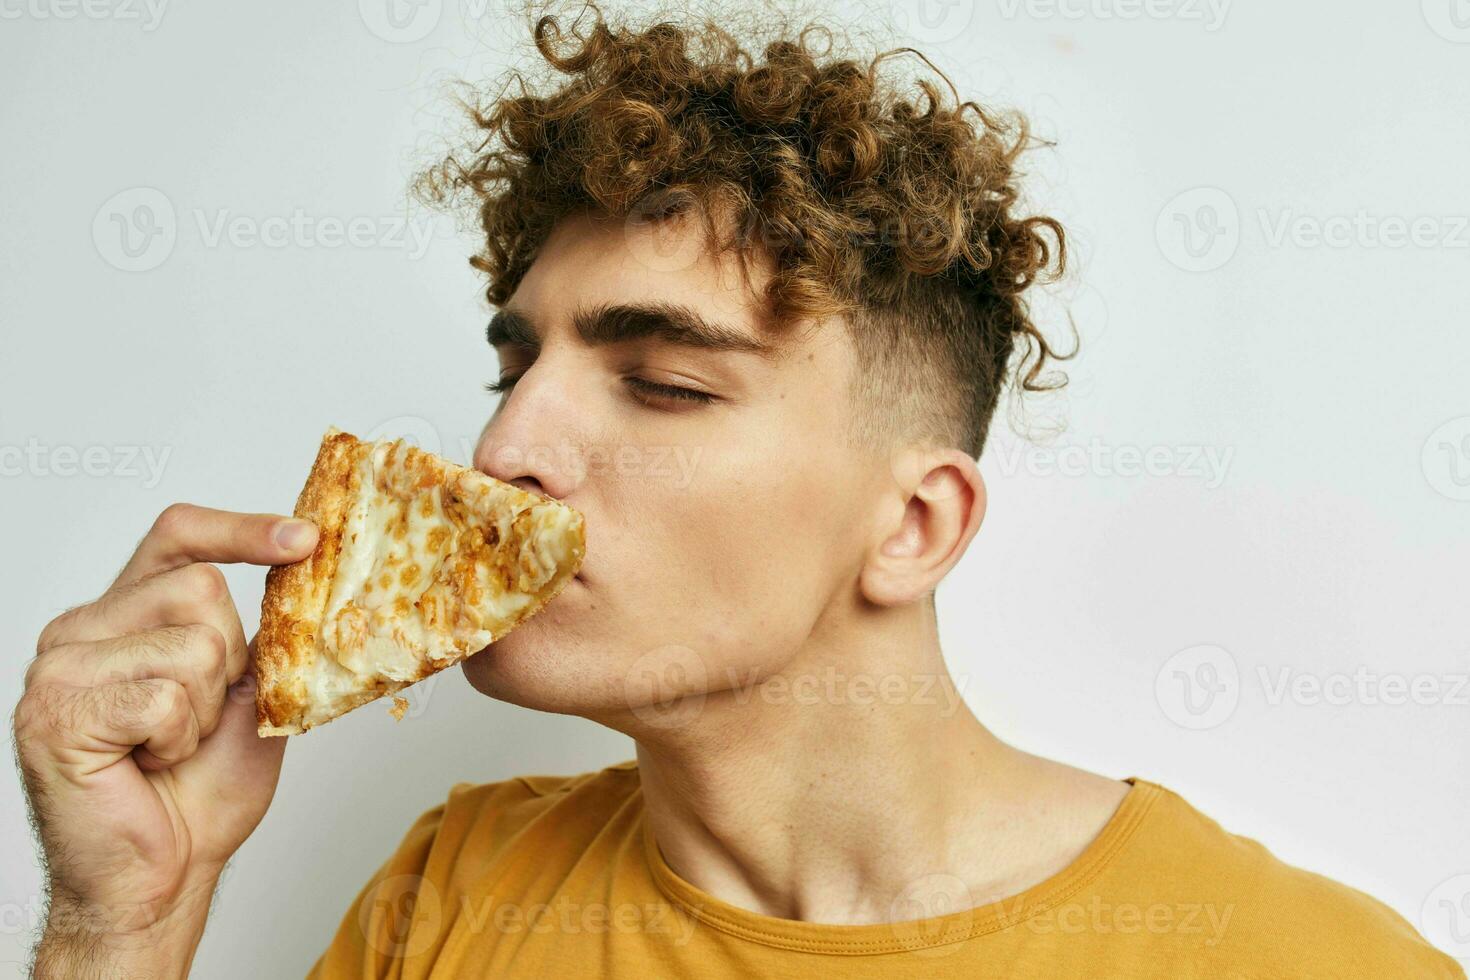 handsome young man pizza snack fast food Lifestyle unaltered photo